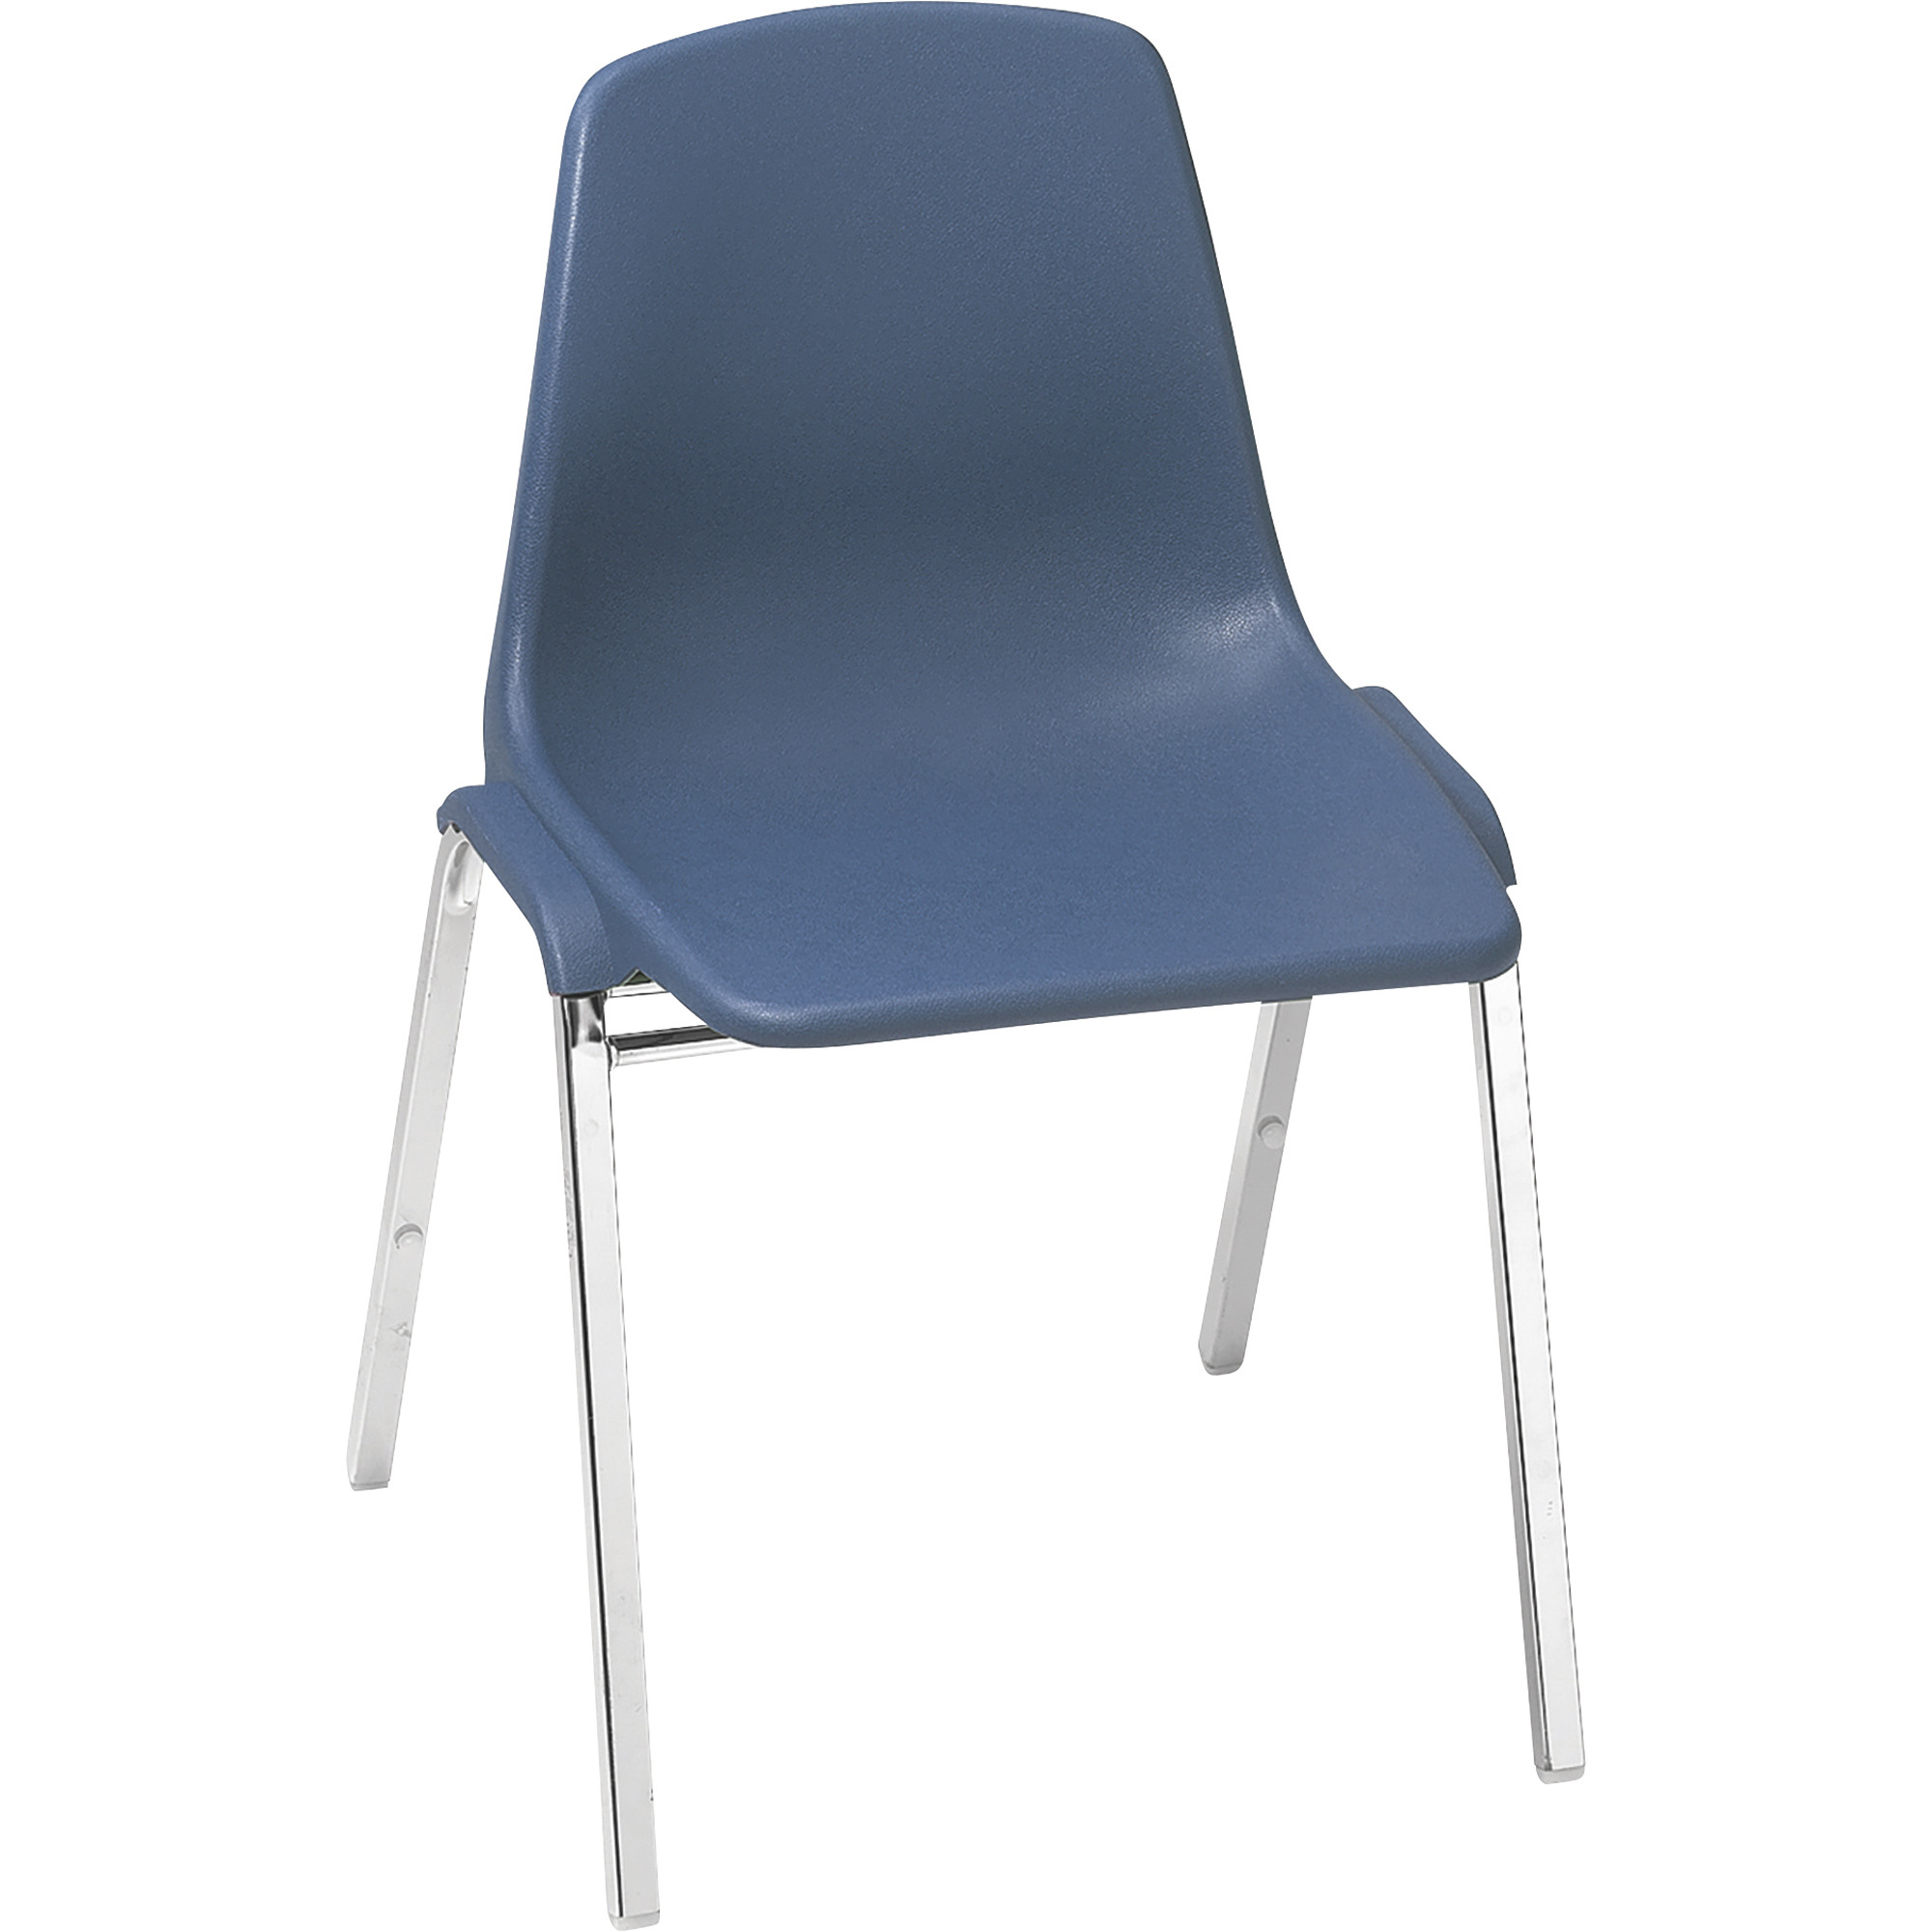 National Public Seating Chrome Metal Stacking Chair with Poly Shell Back and Seat â Blue, Model 8125